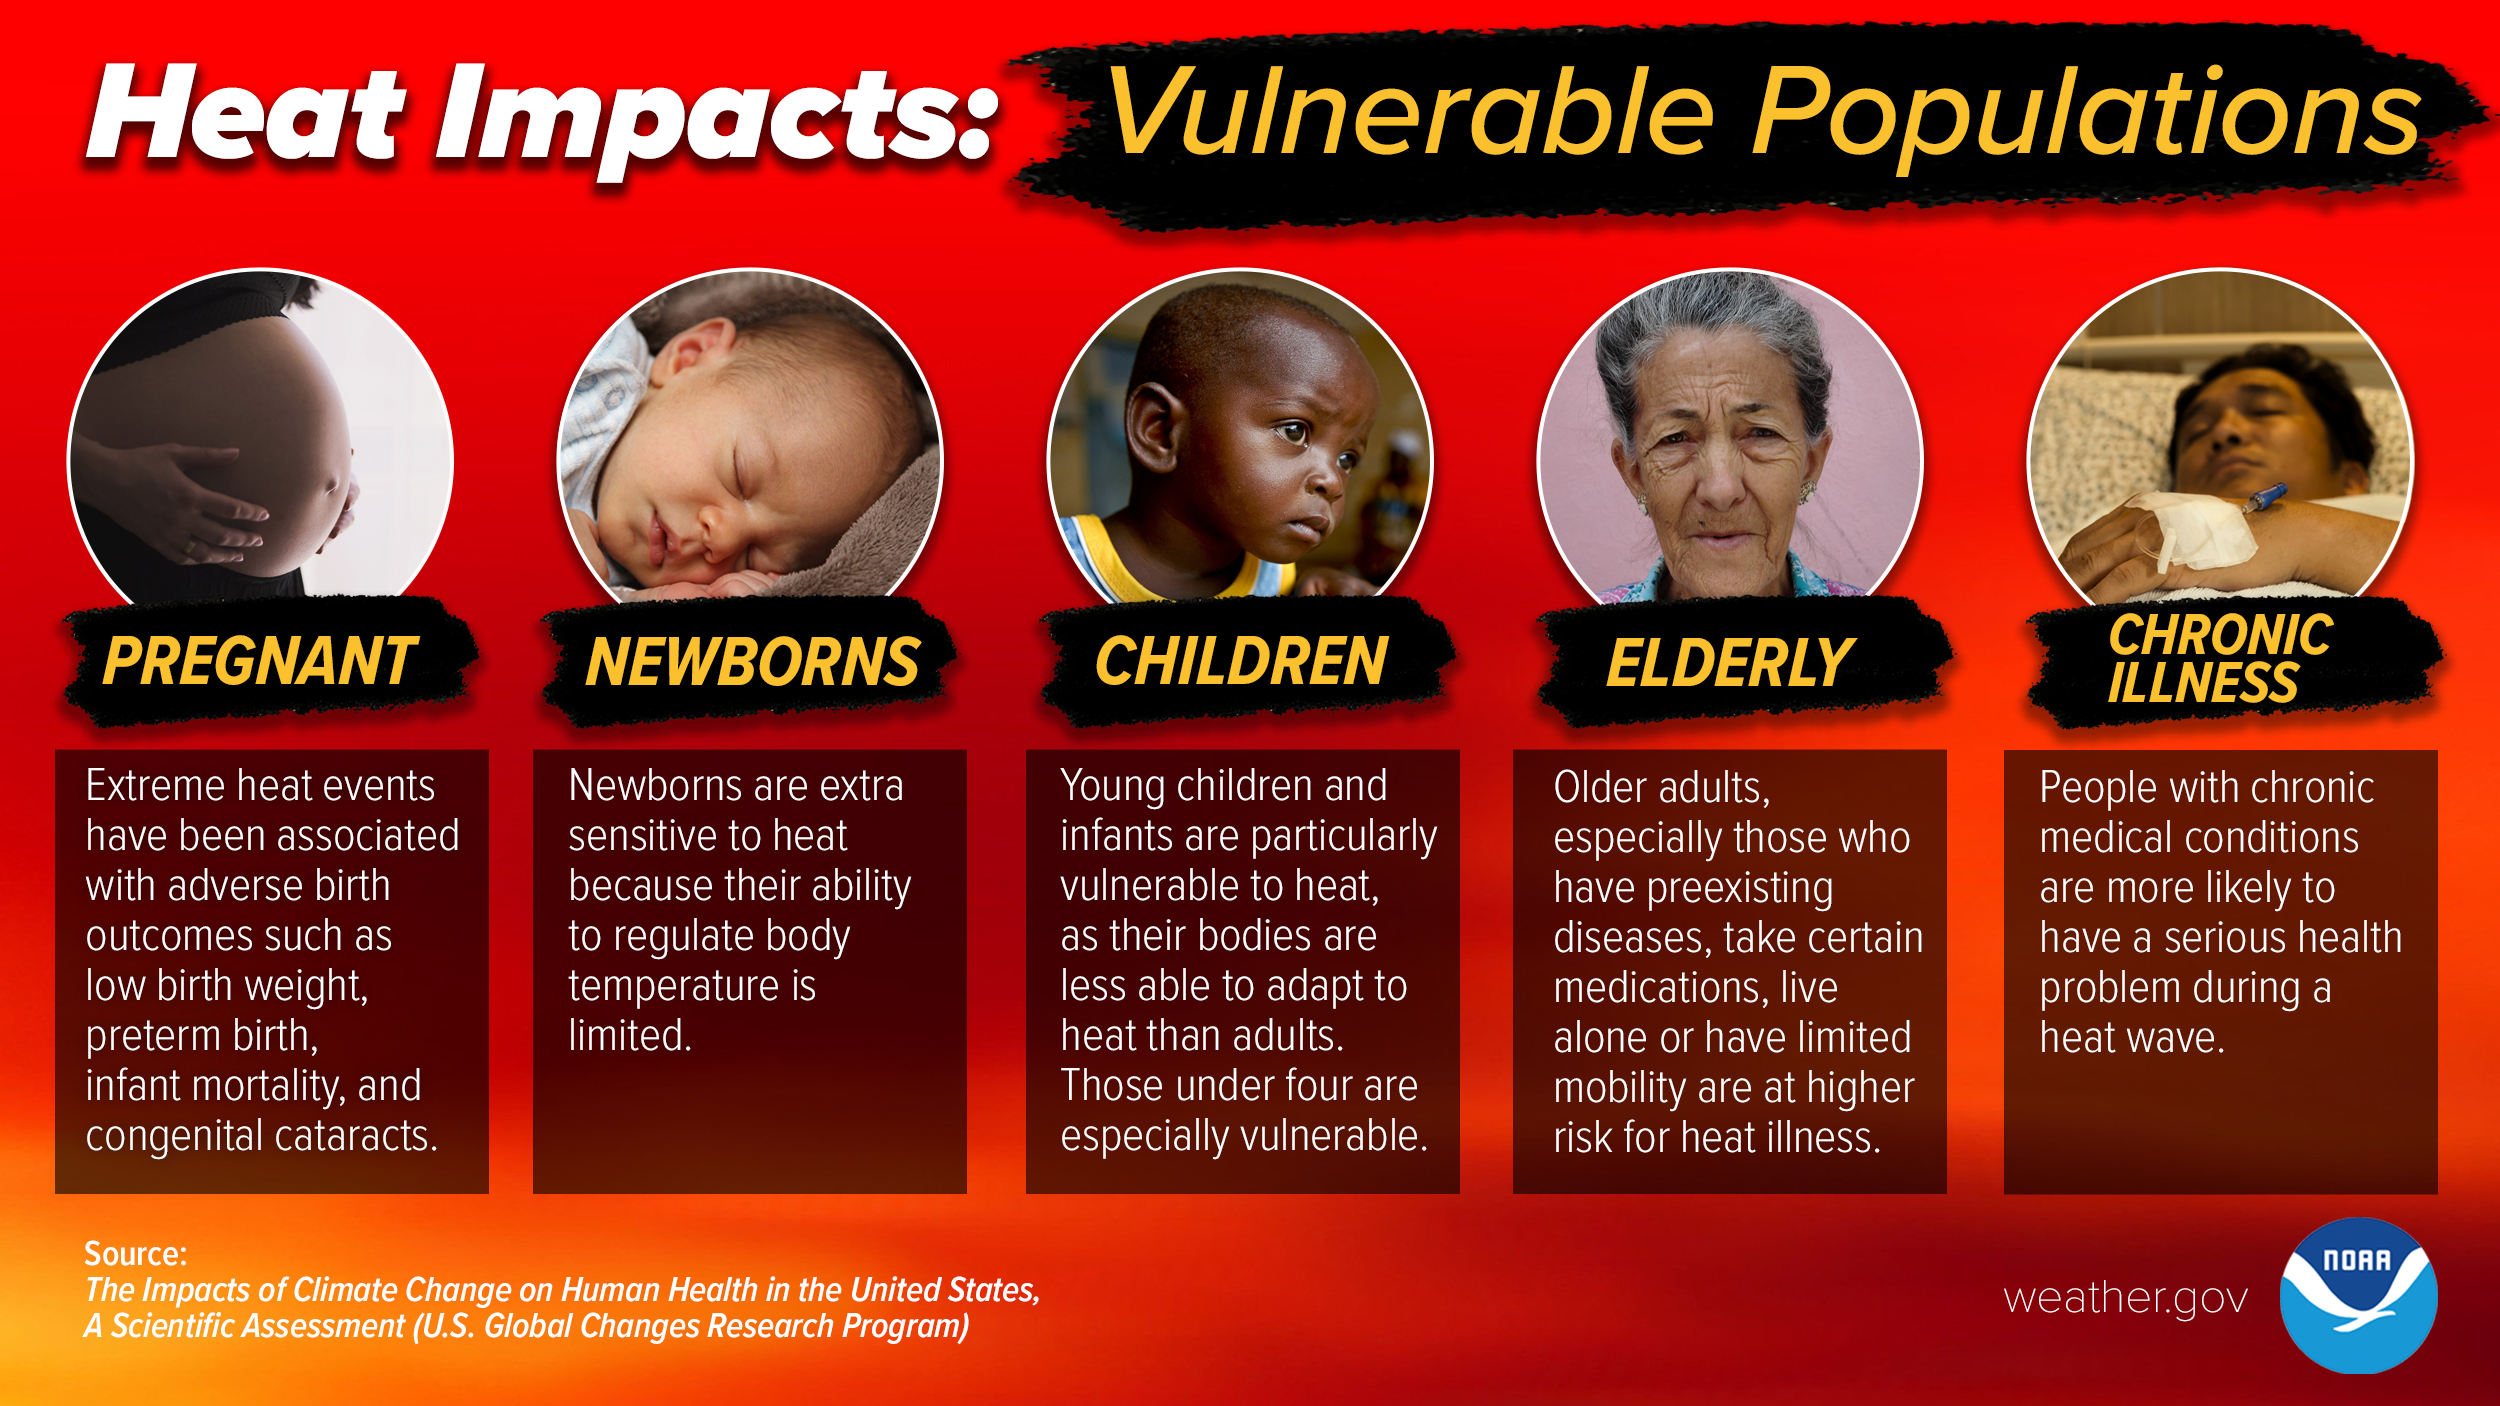 Heat Impacts on Vulnerable Populations. Pregnant: Extreme heat events have been associated with adverse birth outcomes such as low birth weight, preterm birth, infant mortality, and congenital cataracts. Newborns: Newborns are extra sensitive to heat because their ability to regulate body temperature is limited. Children: Young children and infants are particularly vulnerable to heat, as their bodies are less able to adapt to heat than adults. Those under four are especially vulnerable. Elderly: Older adults, especially those who have preexisting diseases, take certain medications, live alone or have limited mobility are at higher risk for heat illness. Chronic Illness: People with chronic medical conditions are more likely to have a serious health problem during a heat wave.